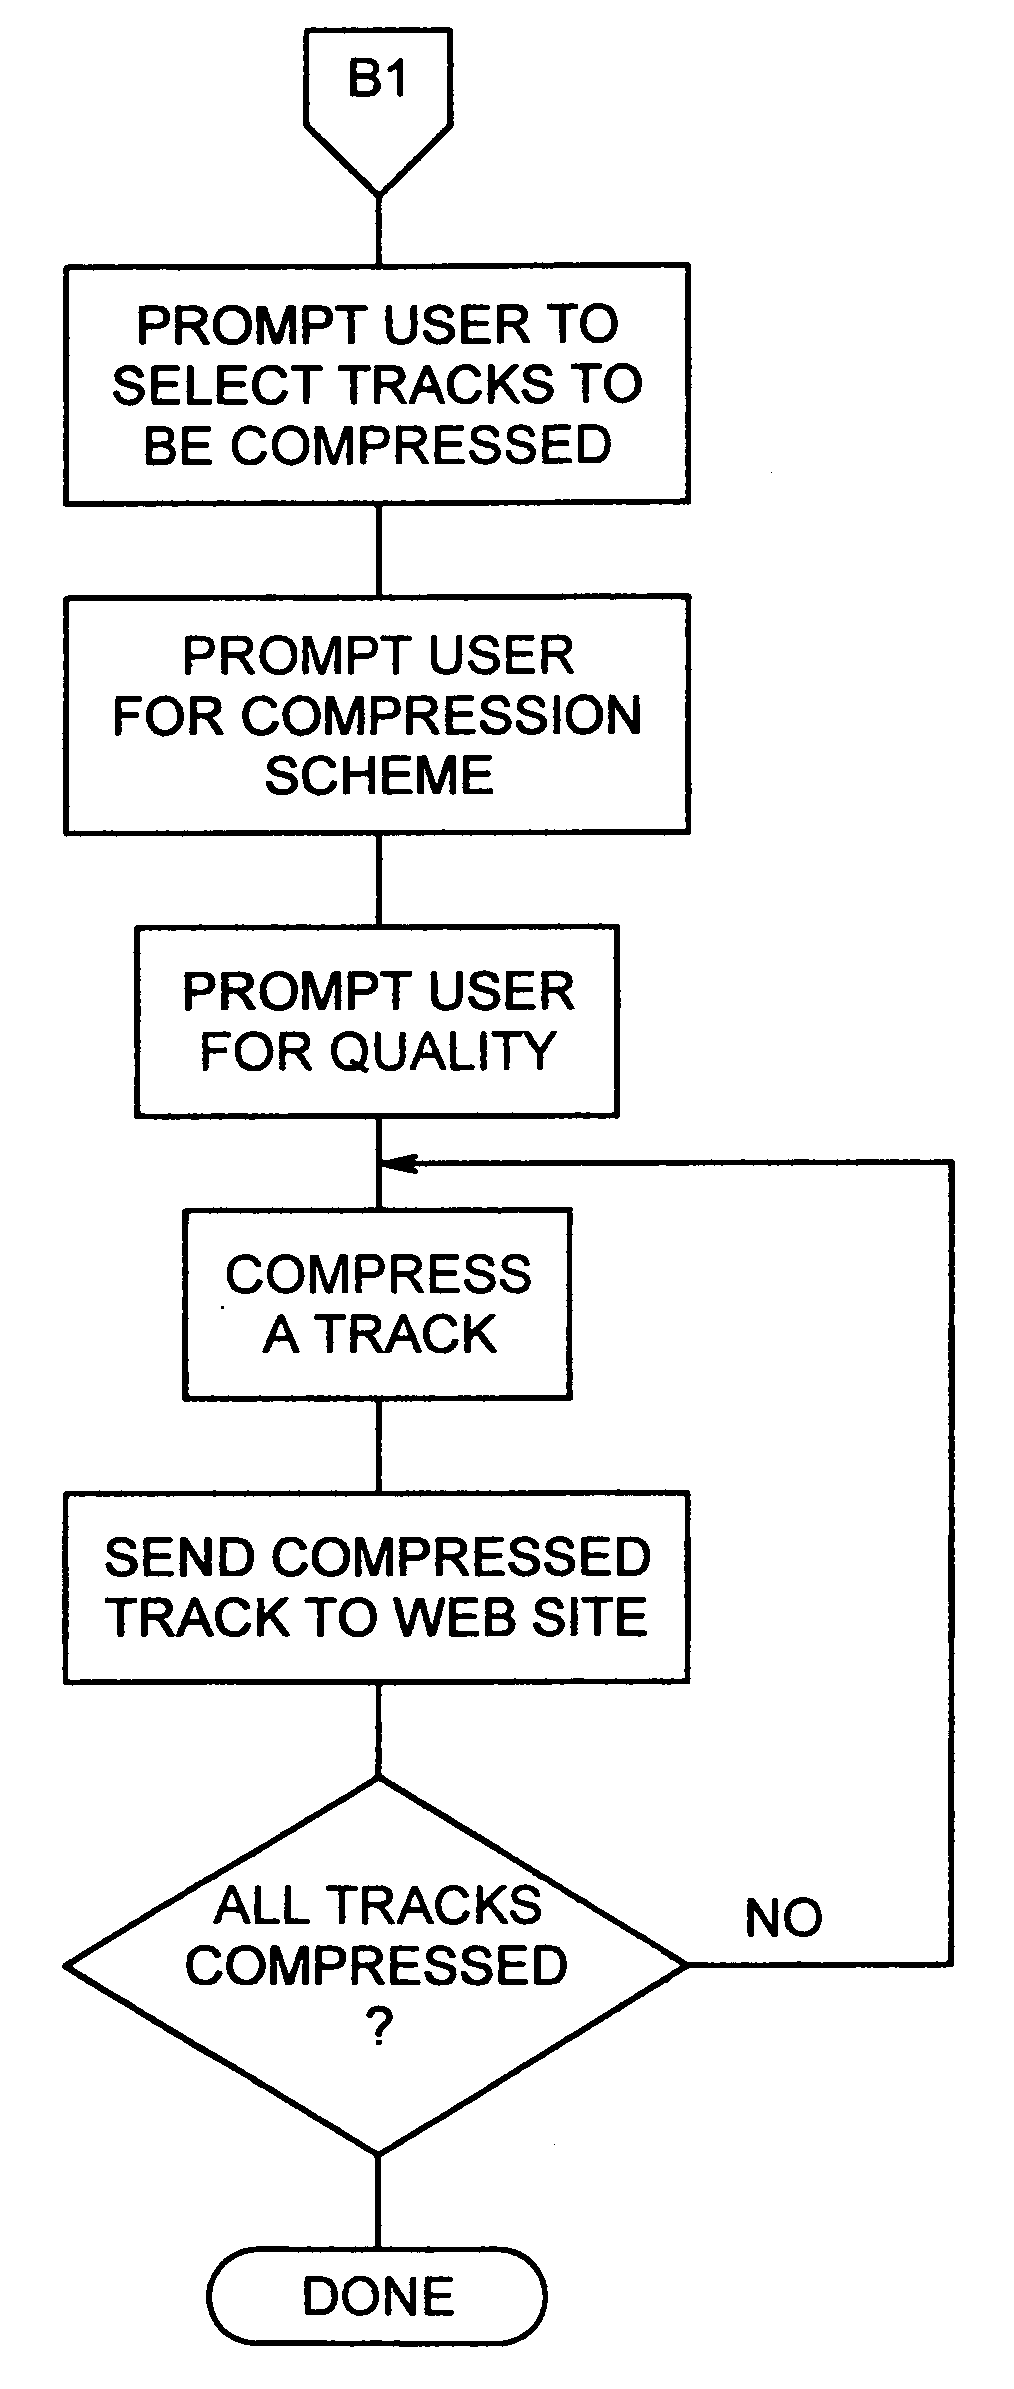 Compression and remote storage apparatus for data, music and video